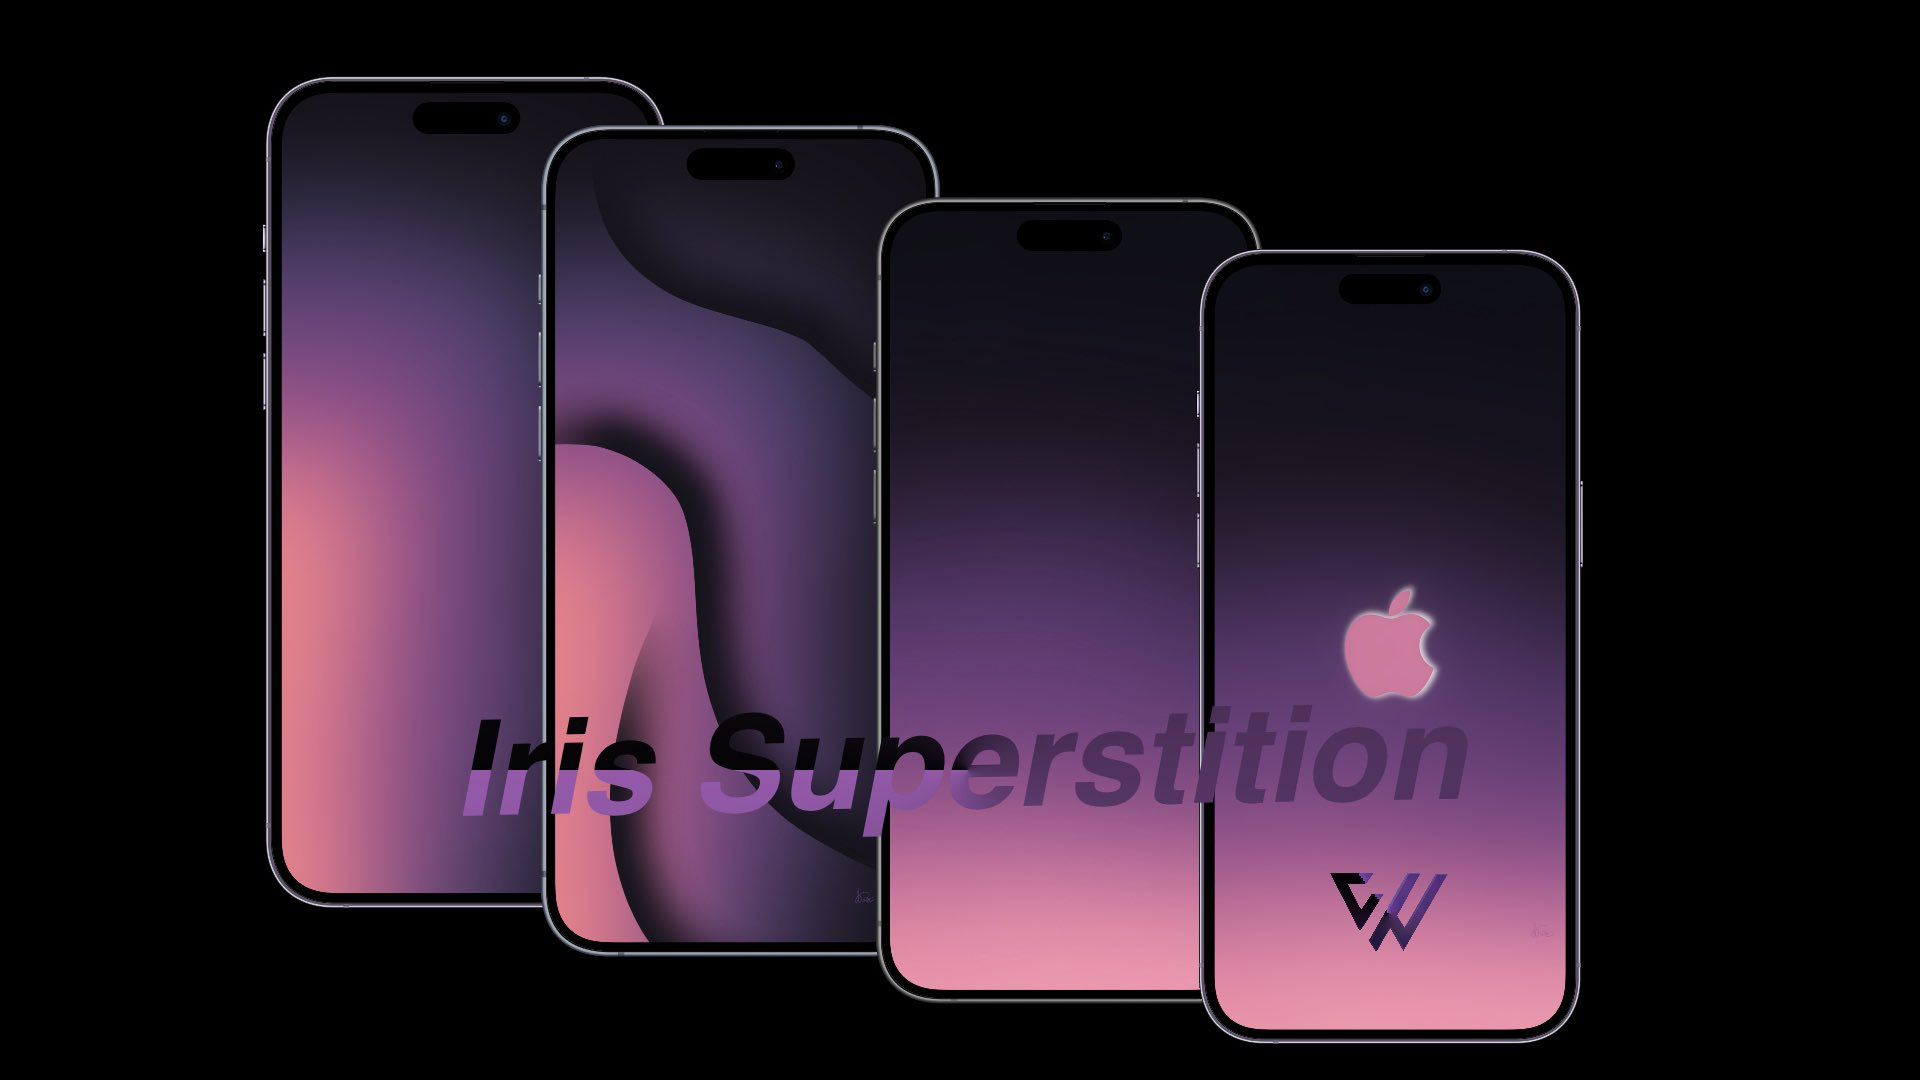 Iris Superstition wallpaper collection for iPhone